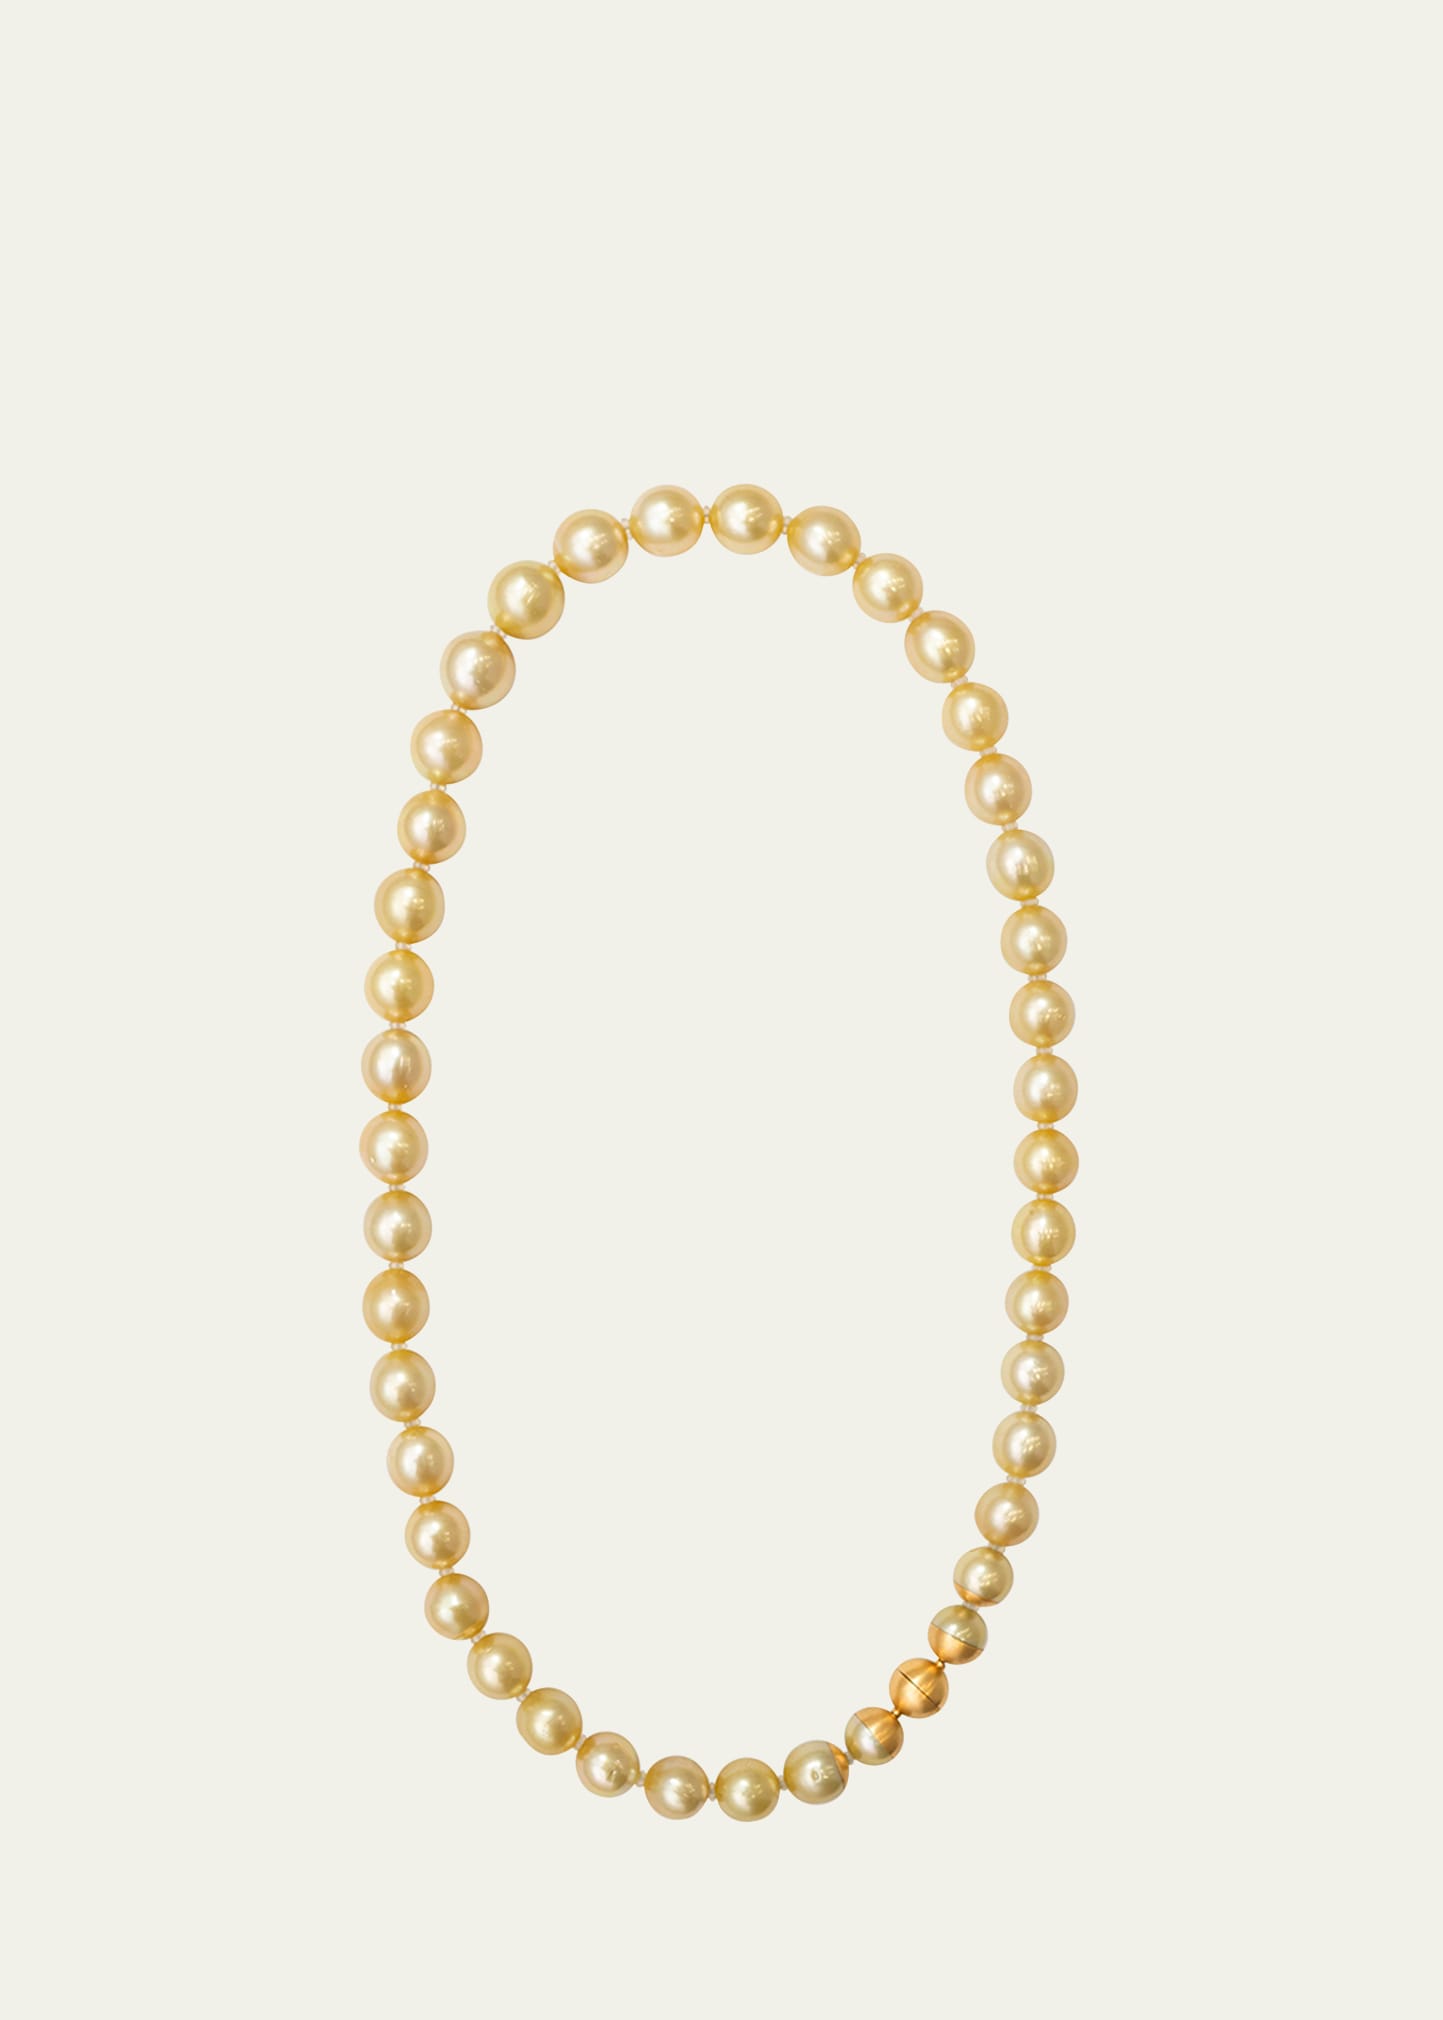 Yutai 18k Yellow Gold Sectional Pearl Necklace With Golden Pearls, 17"l